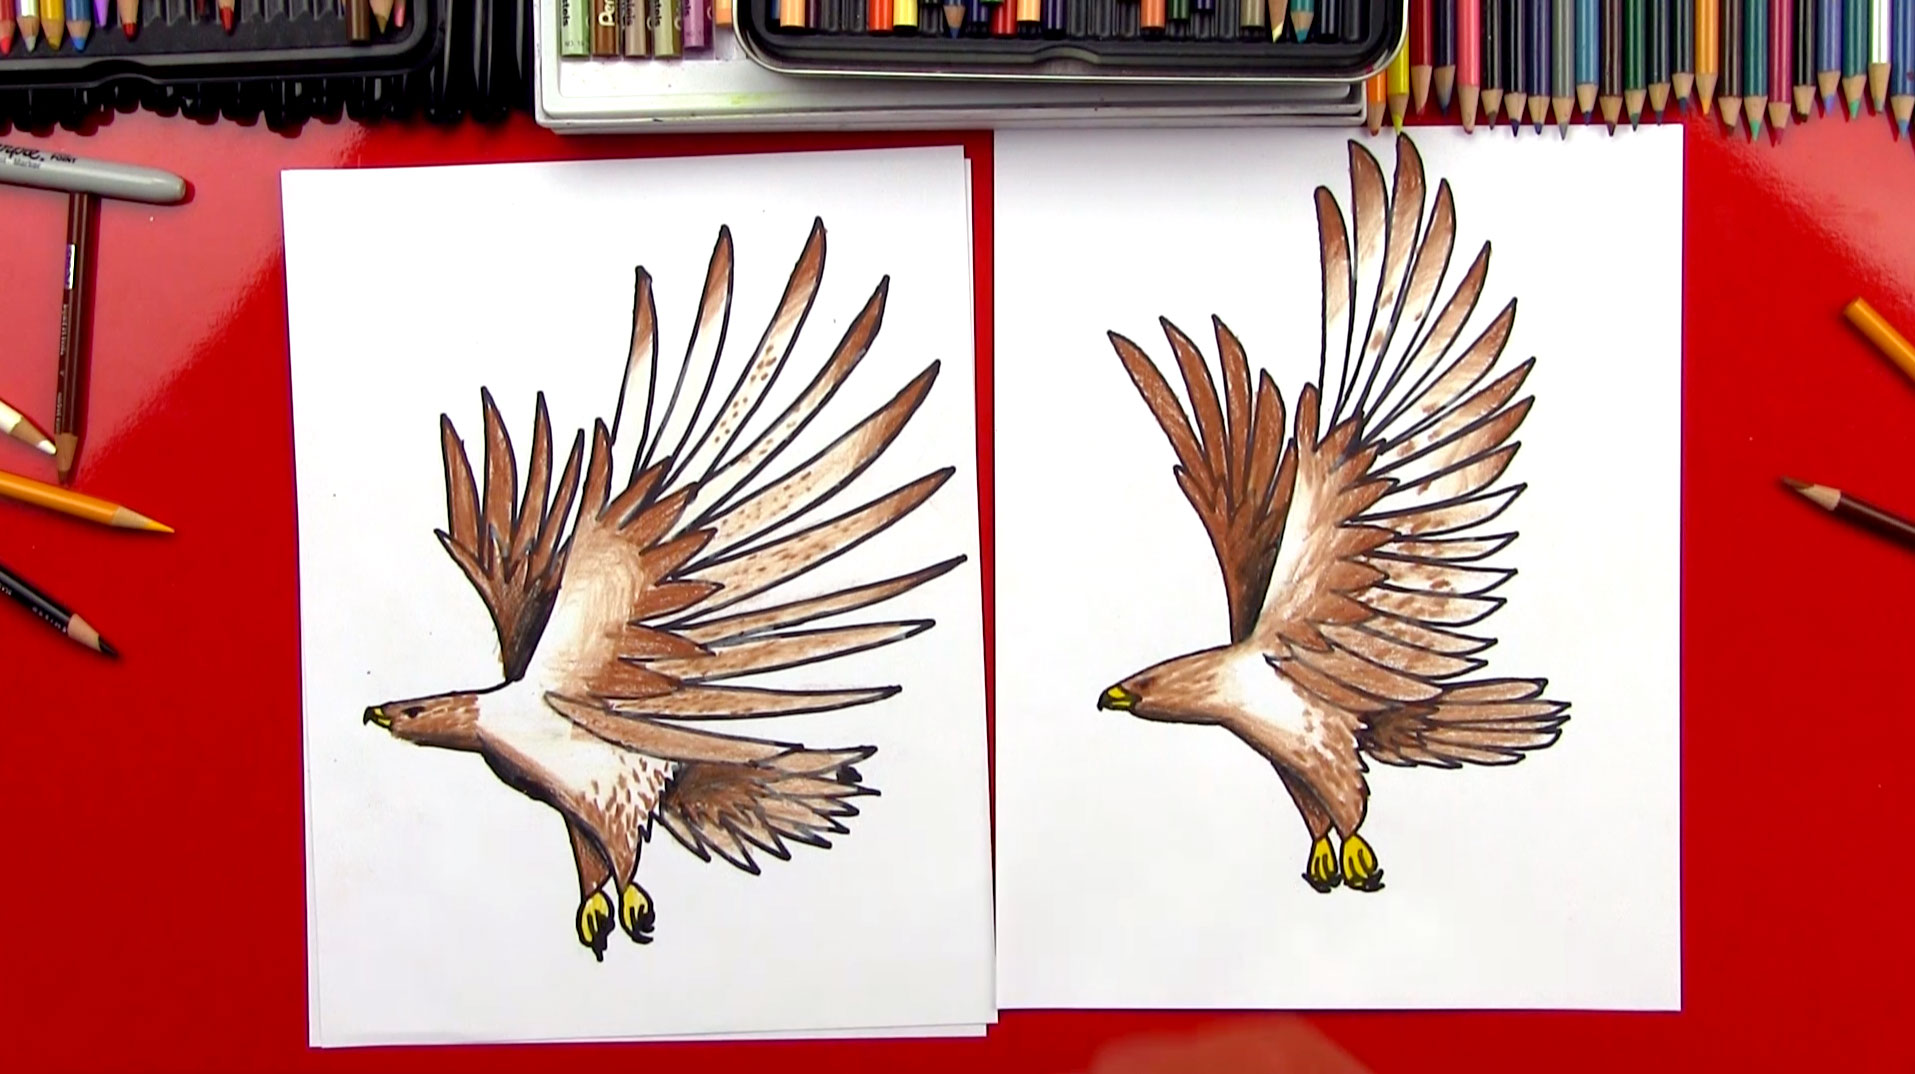 how to draw a hawk